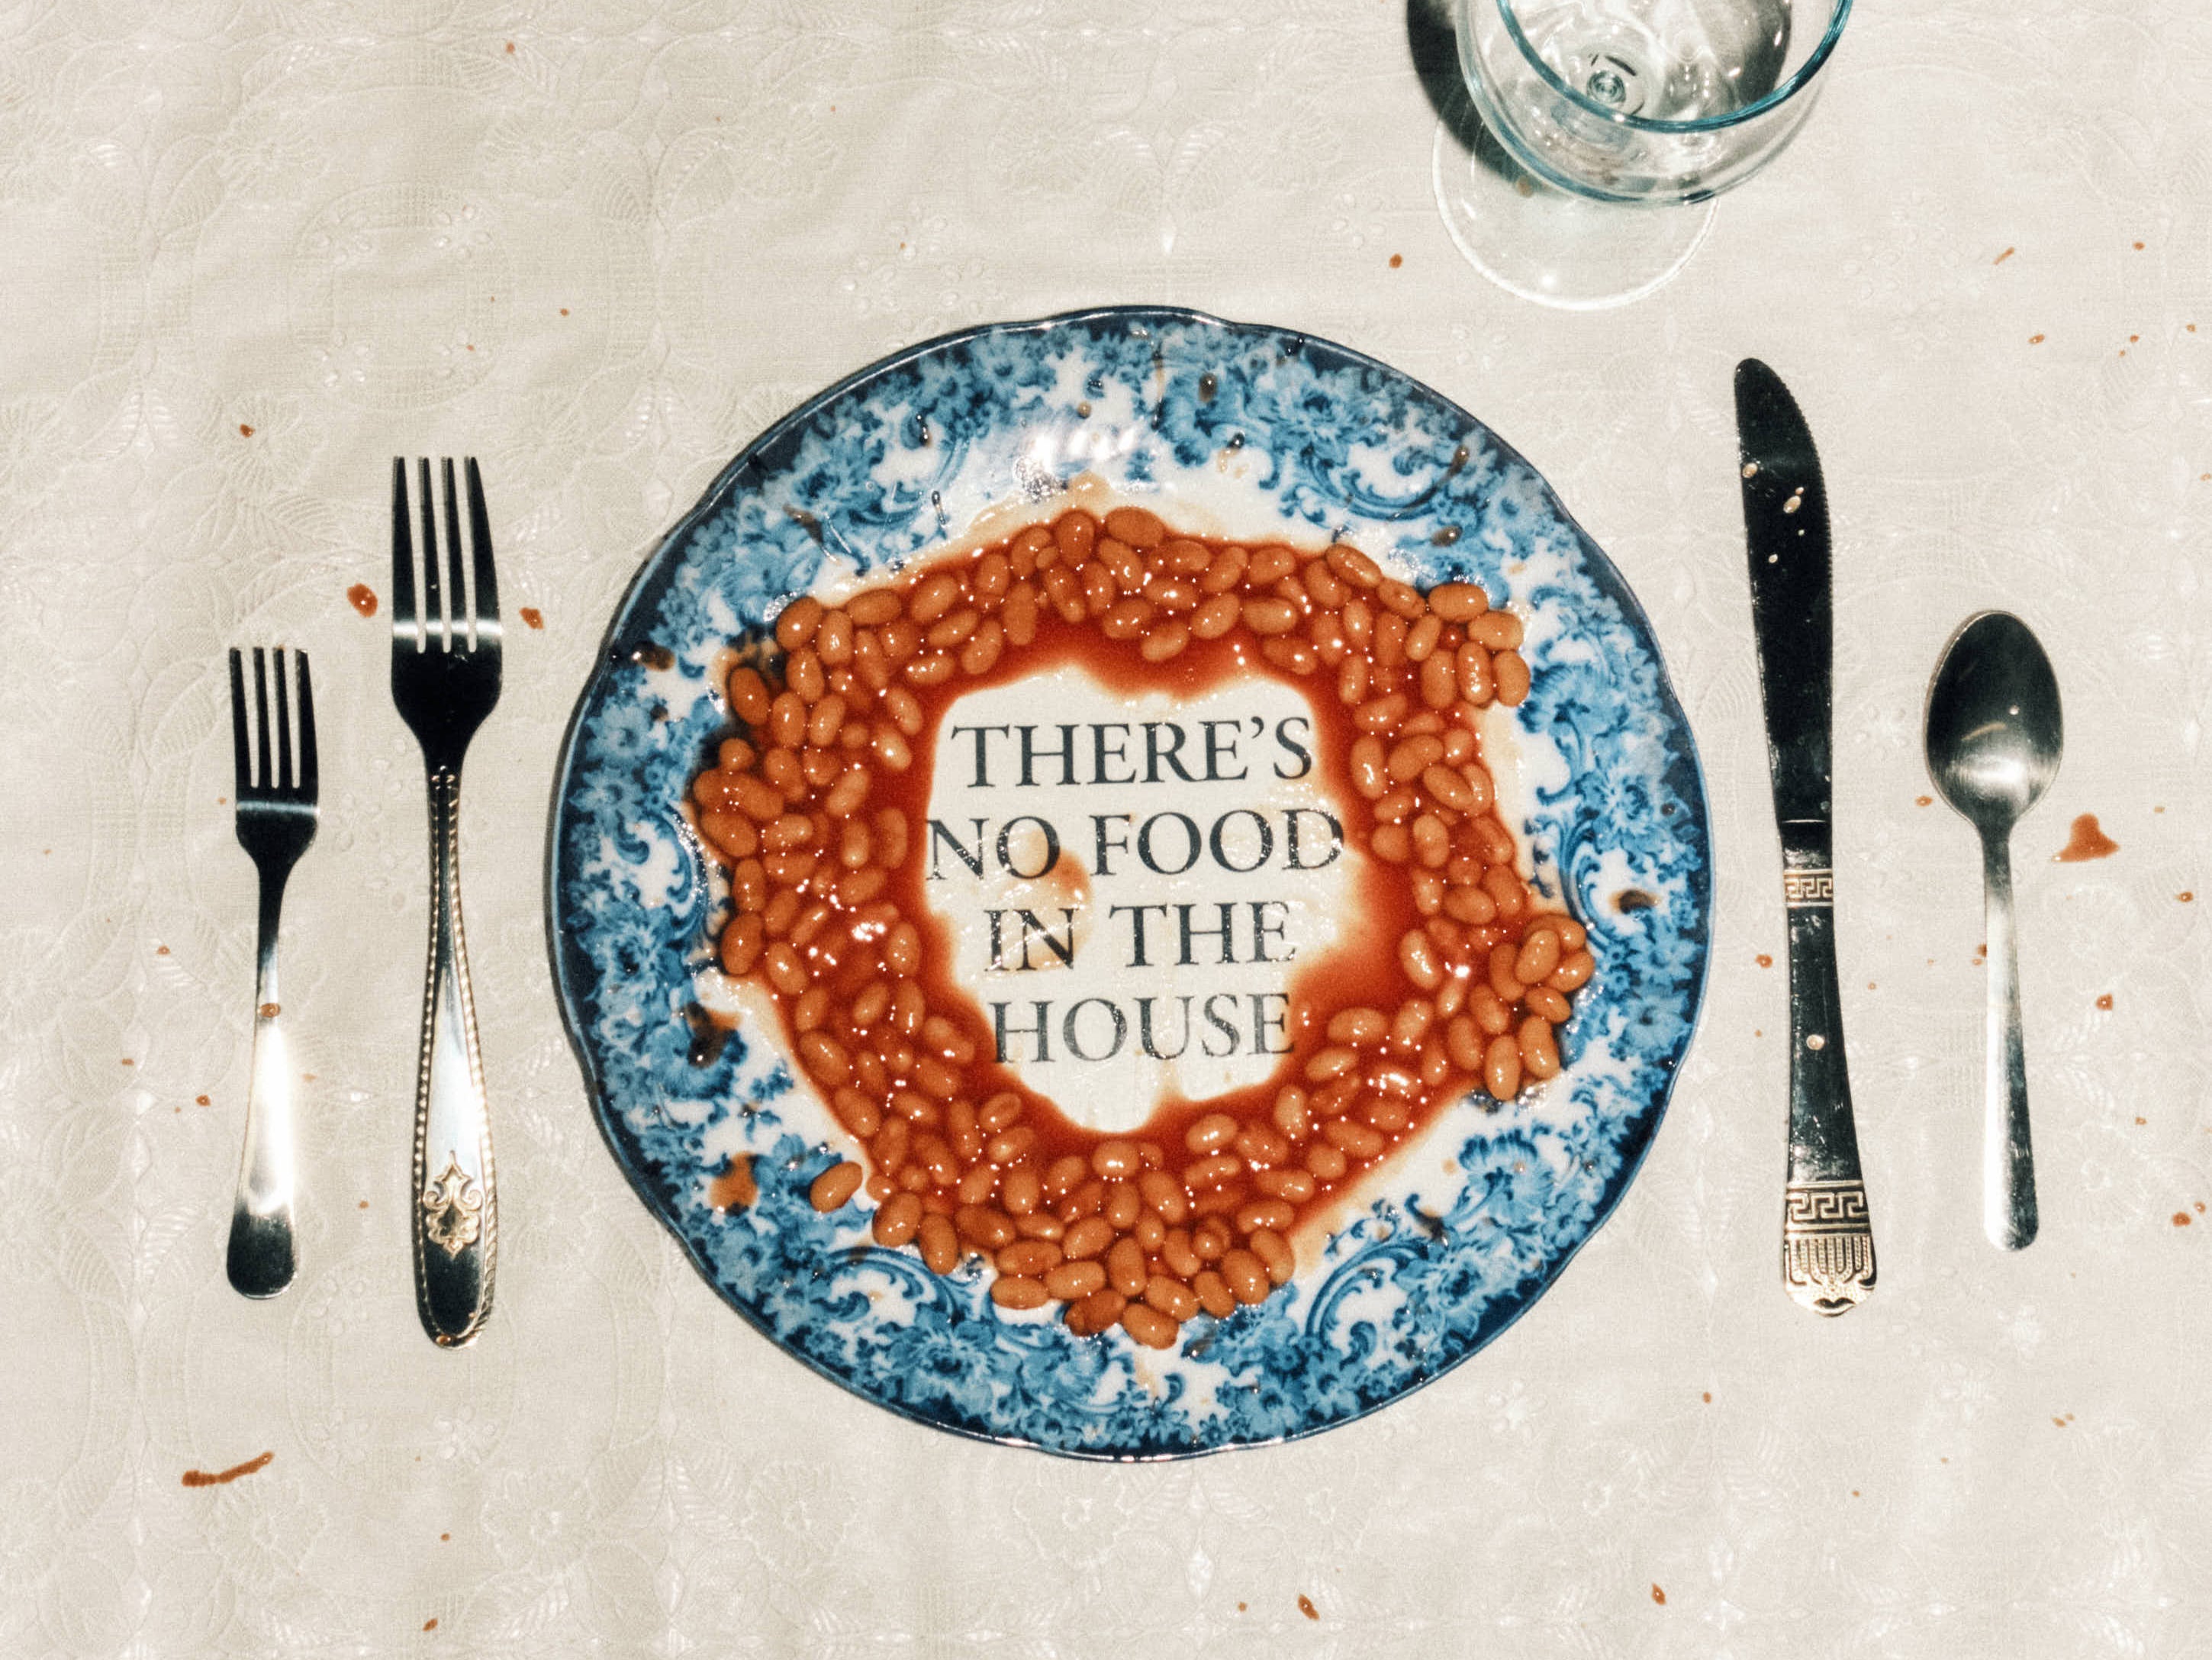 The North Paddington food bank (NPFB) has launched the campaign ‘No Food in The House’